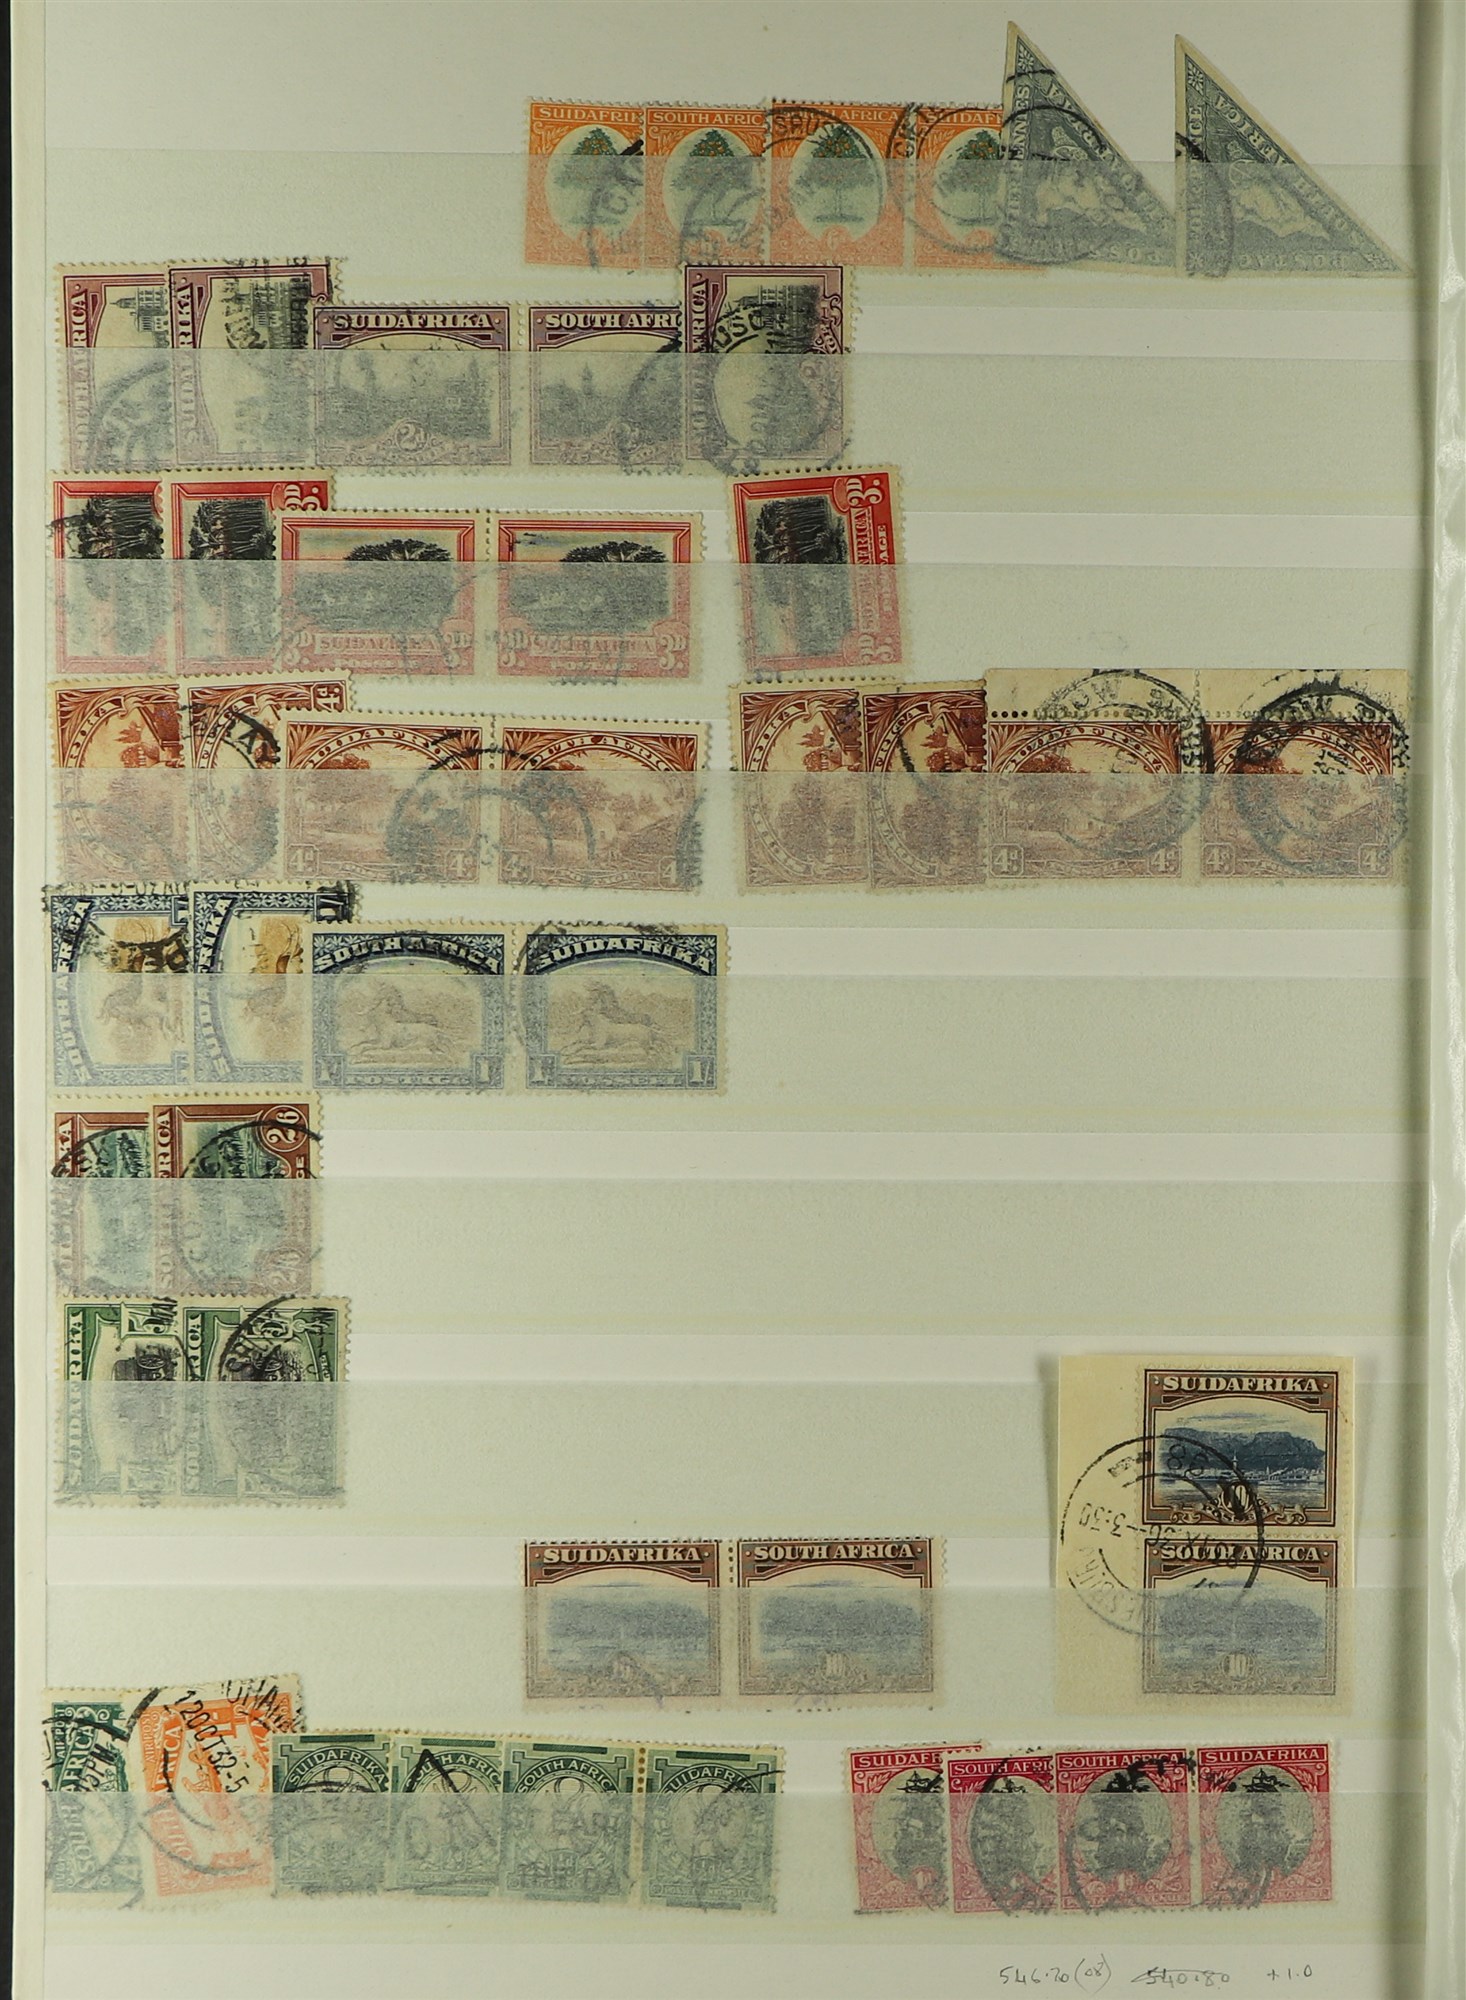 SOUTH AFRICA 1913 - 2000 COLLECTION / ACCUMULATION of 1500+ mint / never hinged mint & used stamps - Image 2 of 15